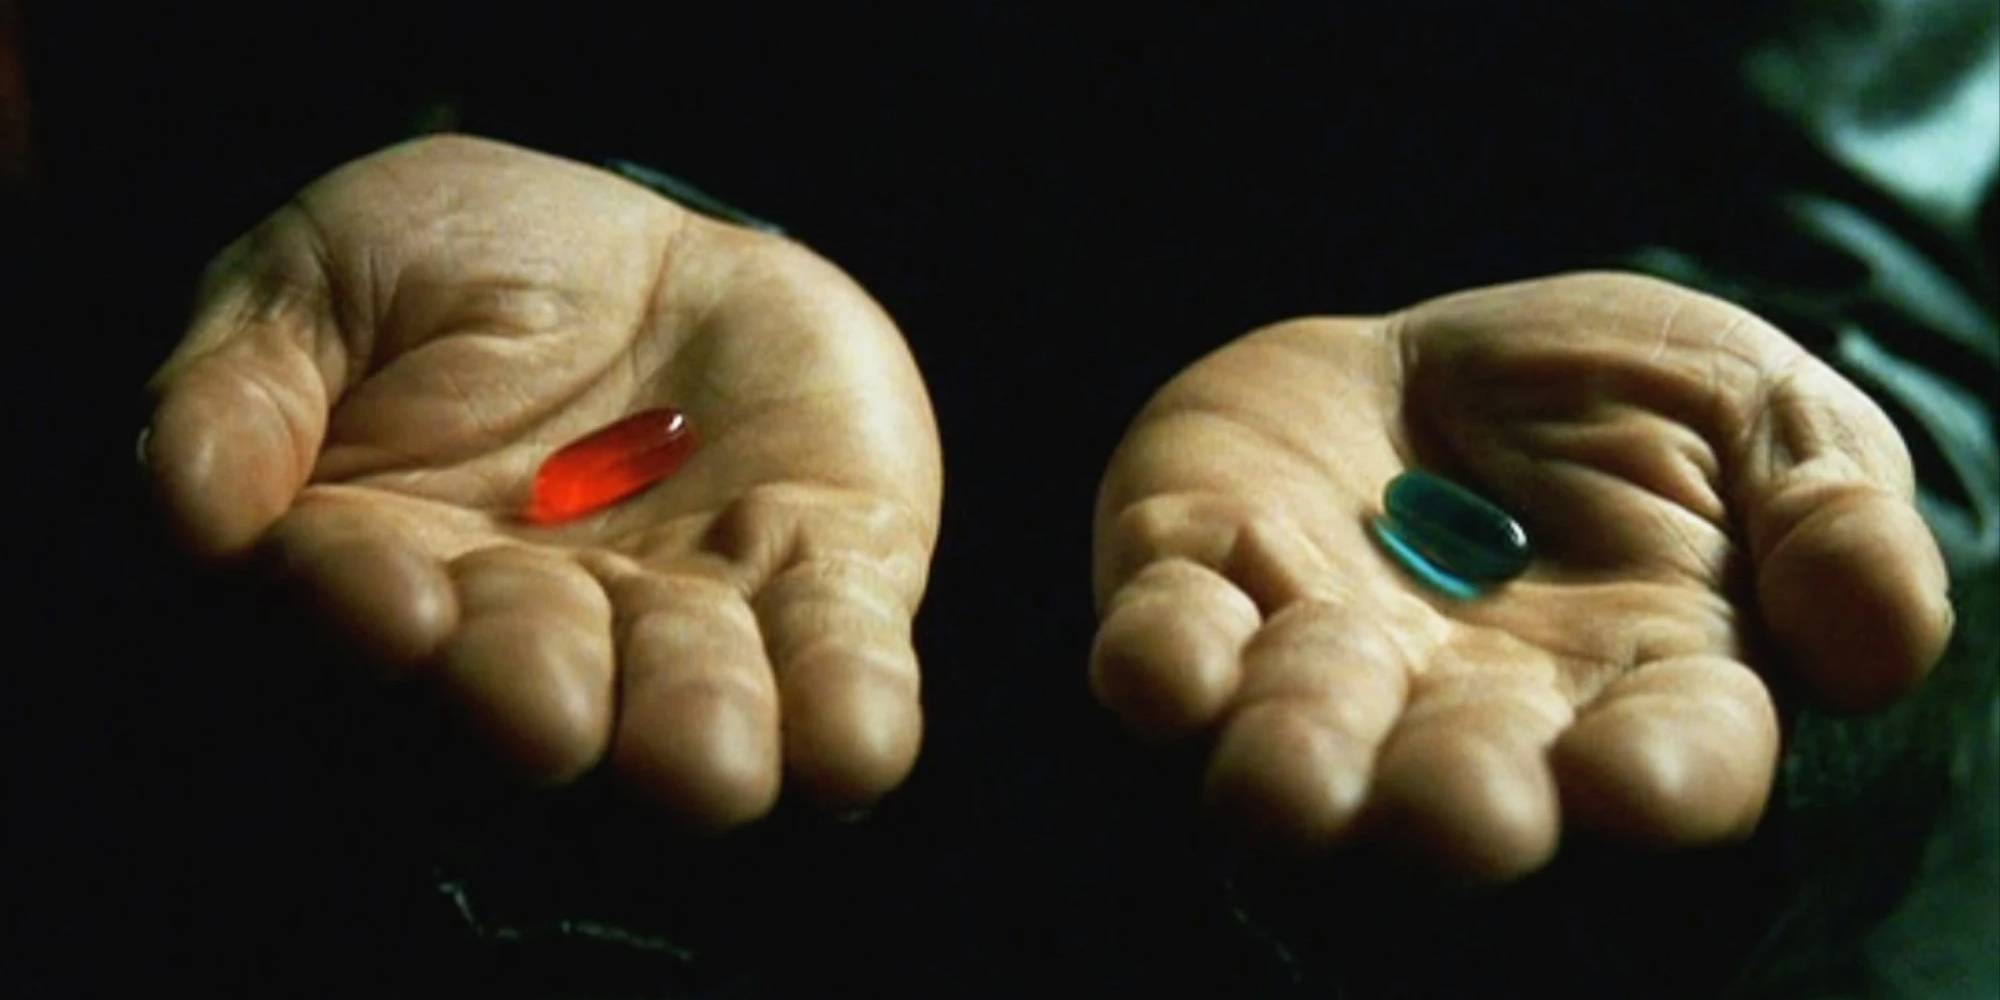 Trinity - the red pill loved all of it